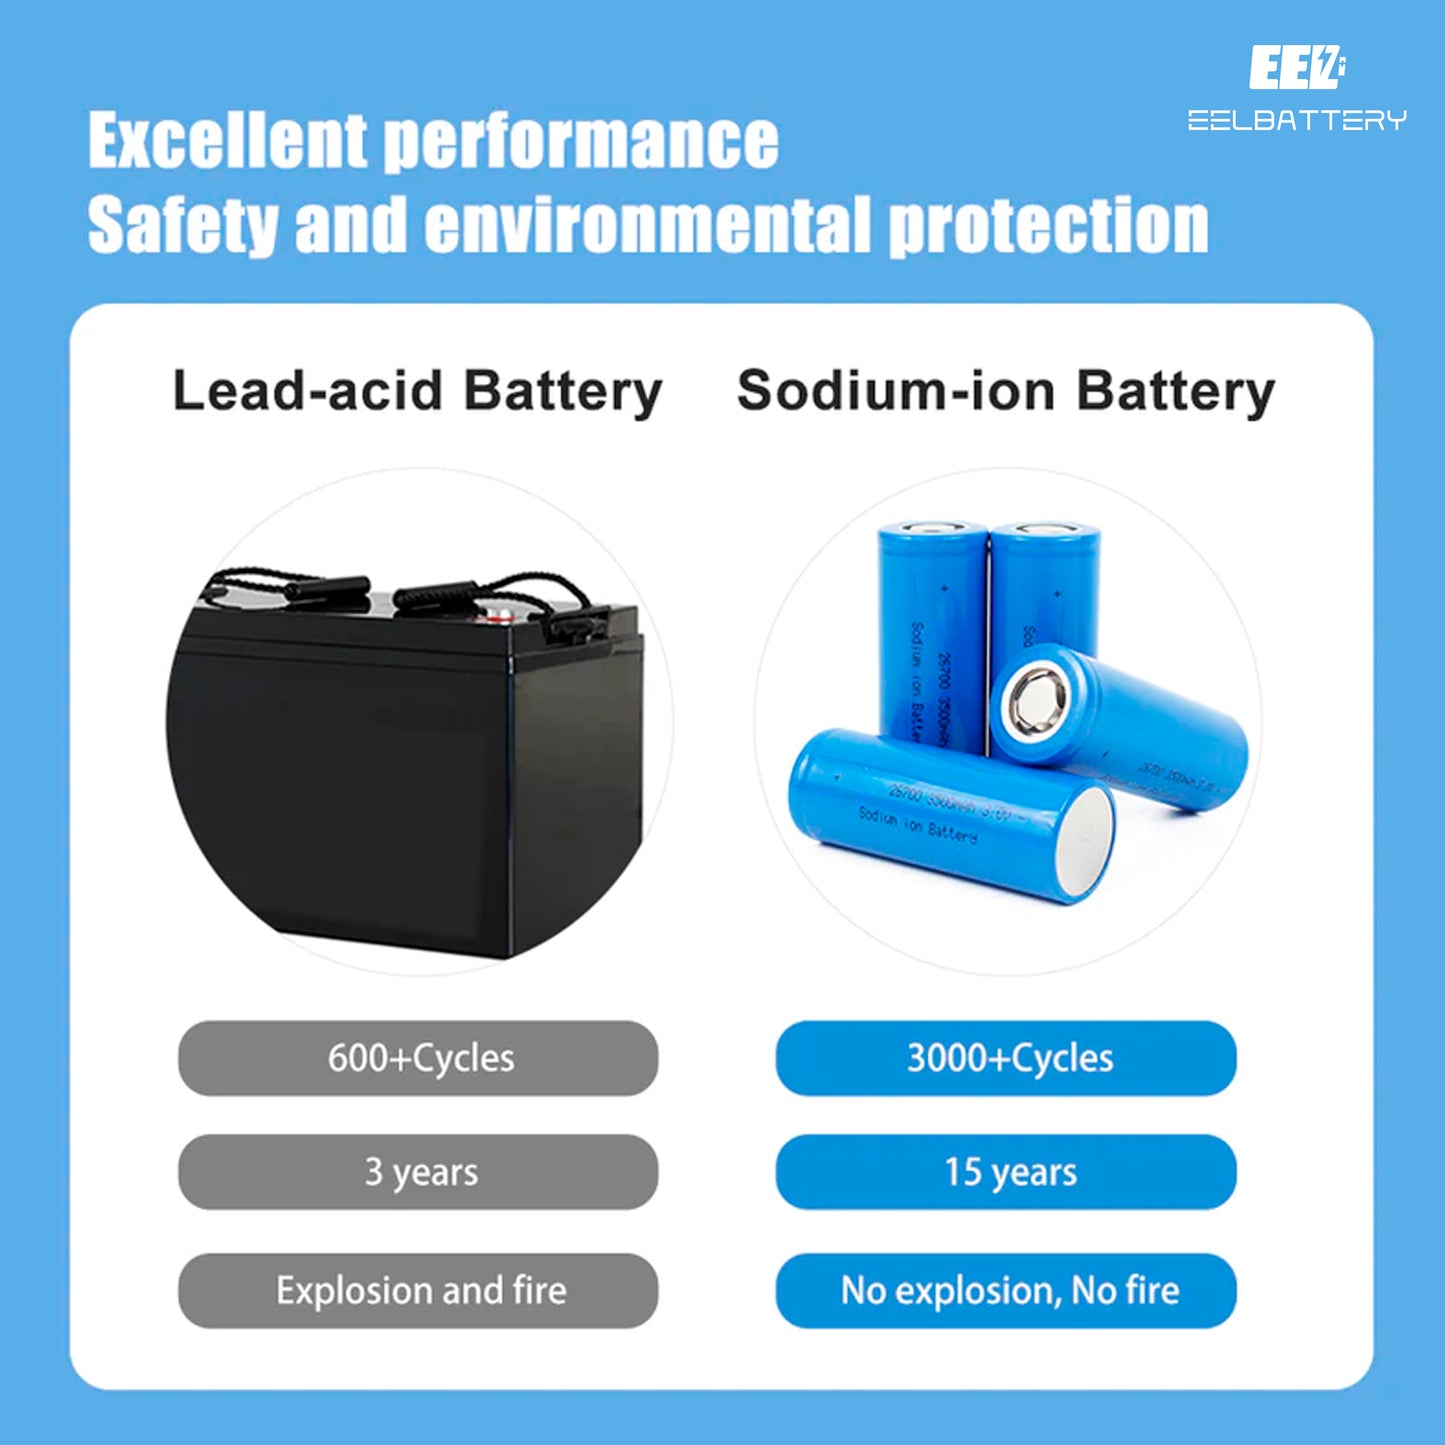 Sodium-ion Battery 26700 3.0 V 3500mAh SIB Rechargeable Cell Cycle Life 3000+ For Powering E-bike,EV